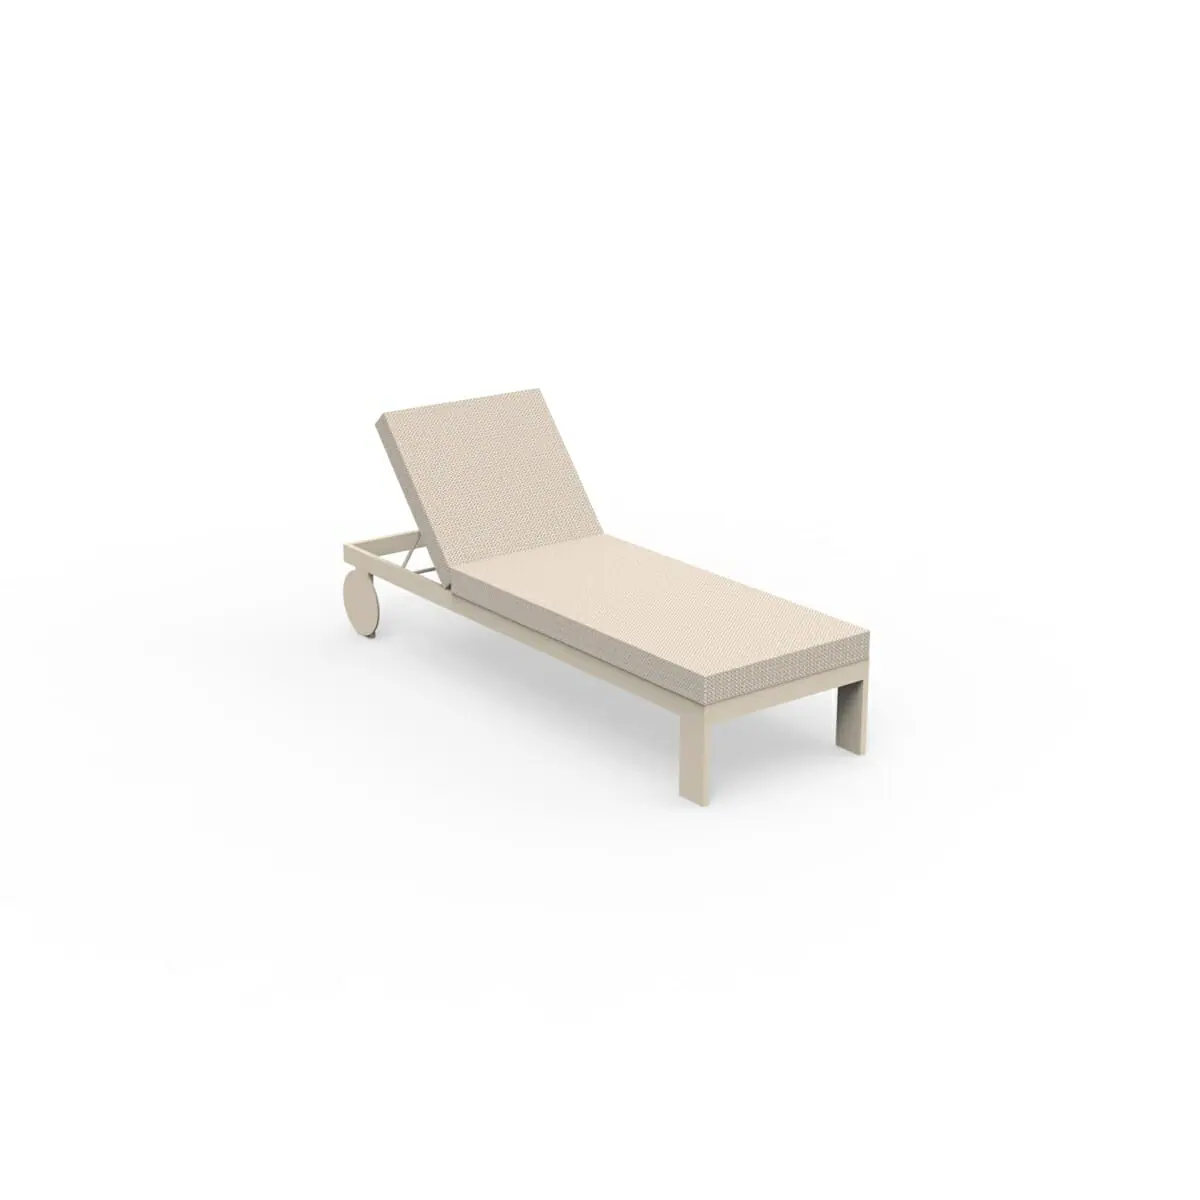 84606-83490-posidonia-outdoor-furniture-collection